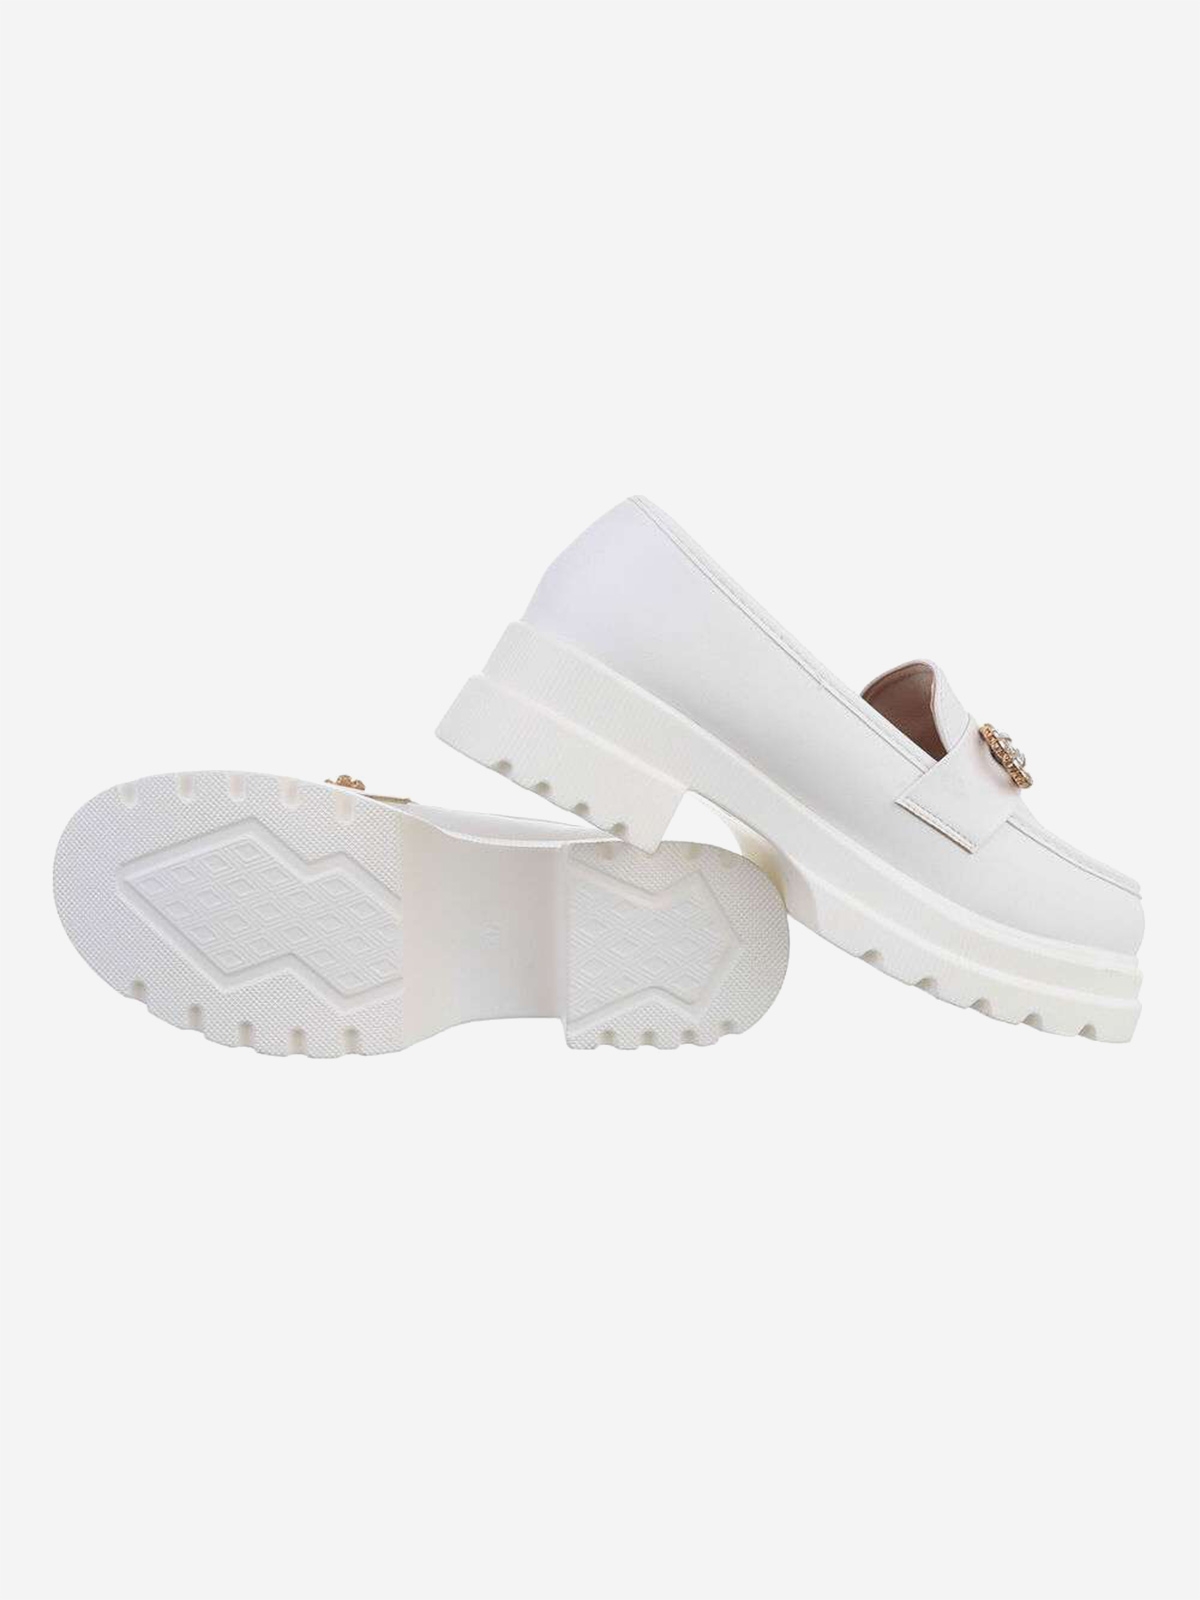 Women's loafers with front metal trim in white